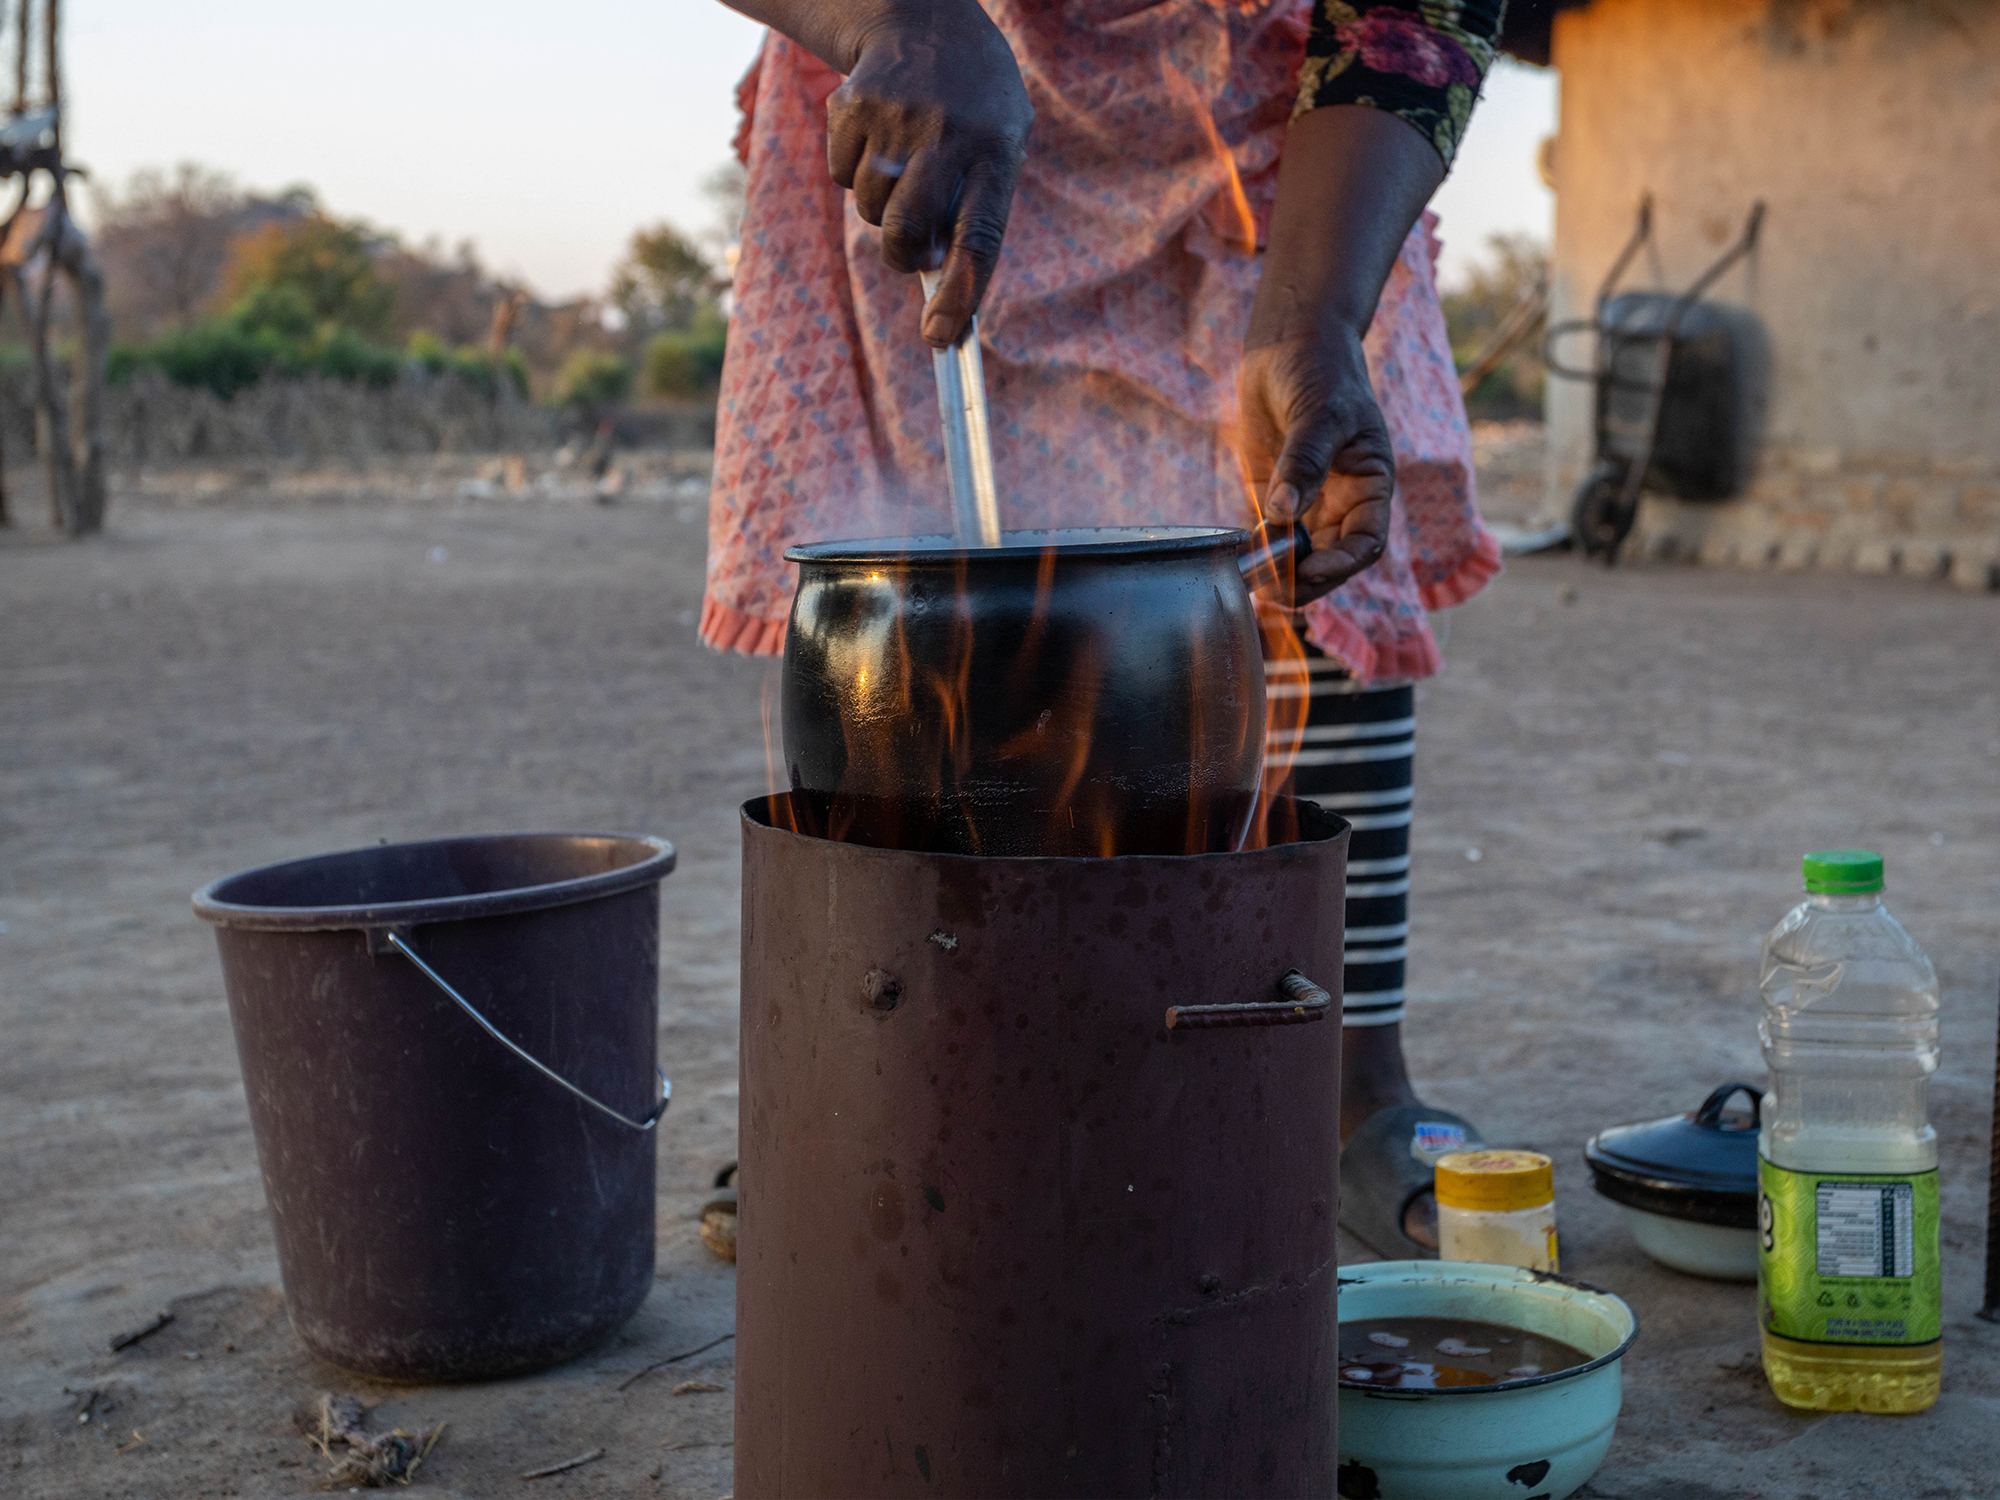 Cooking on an eco-friendly stove.